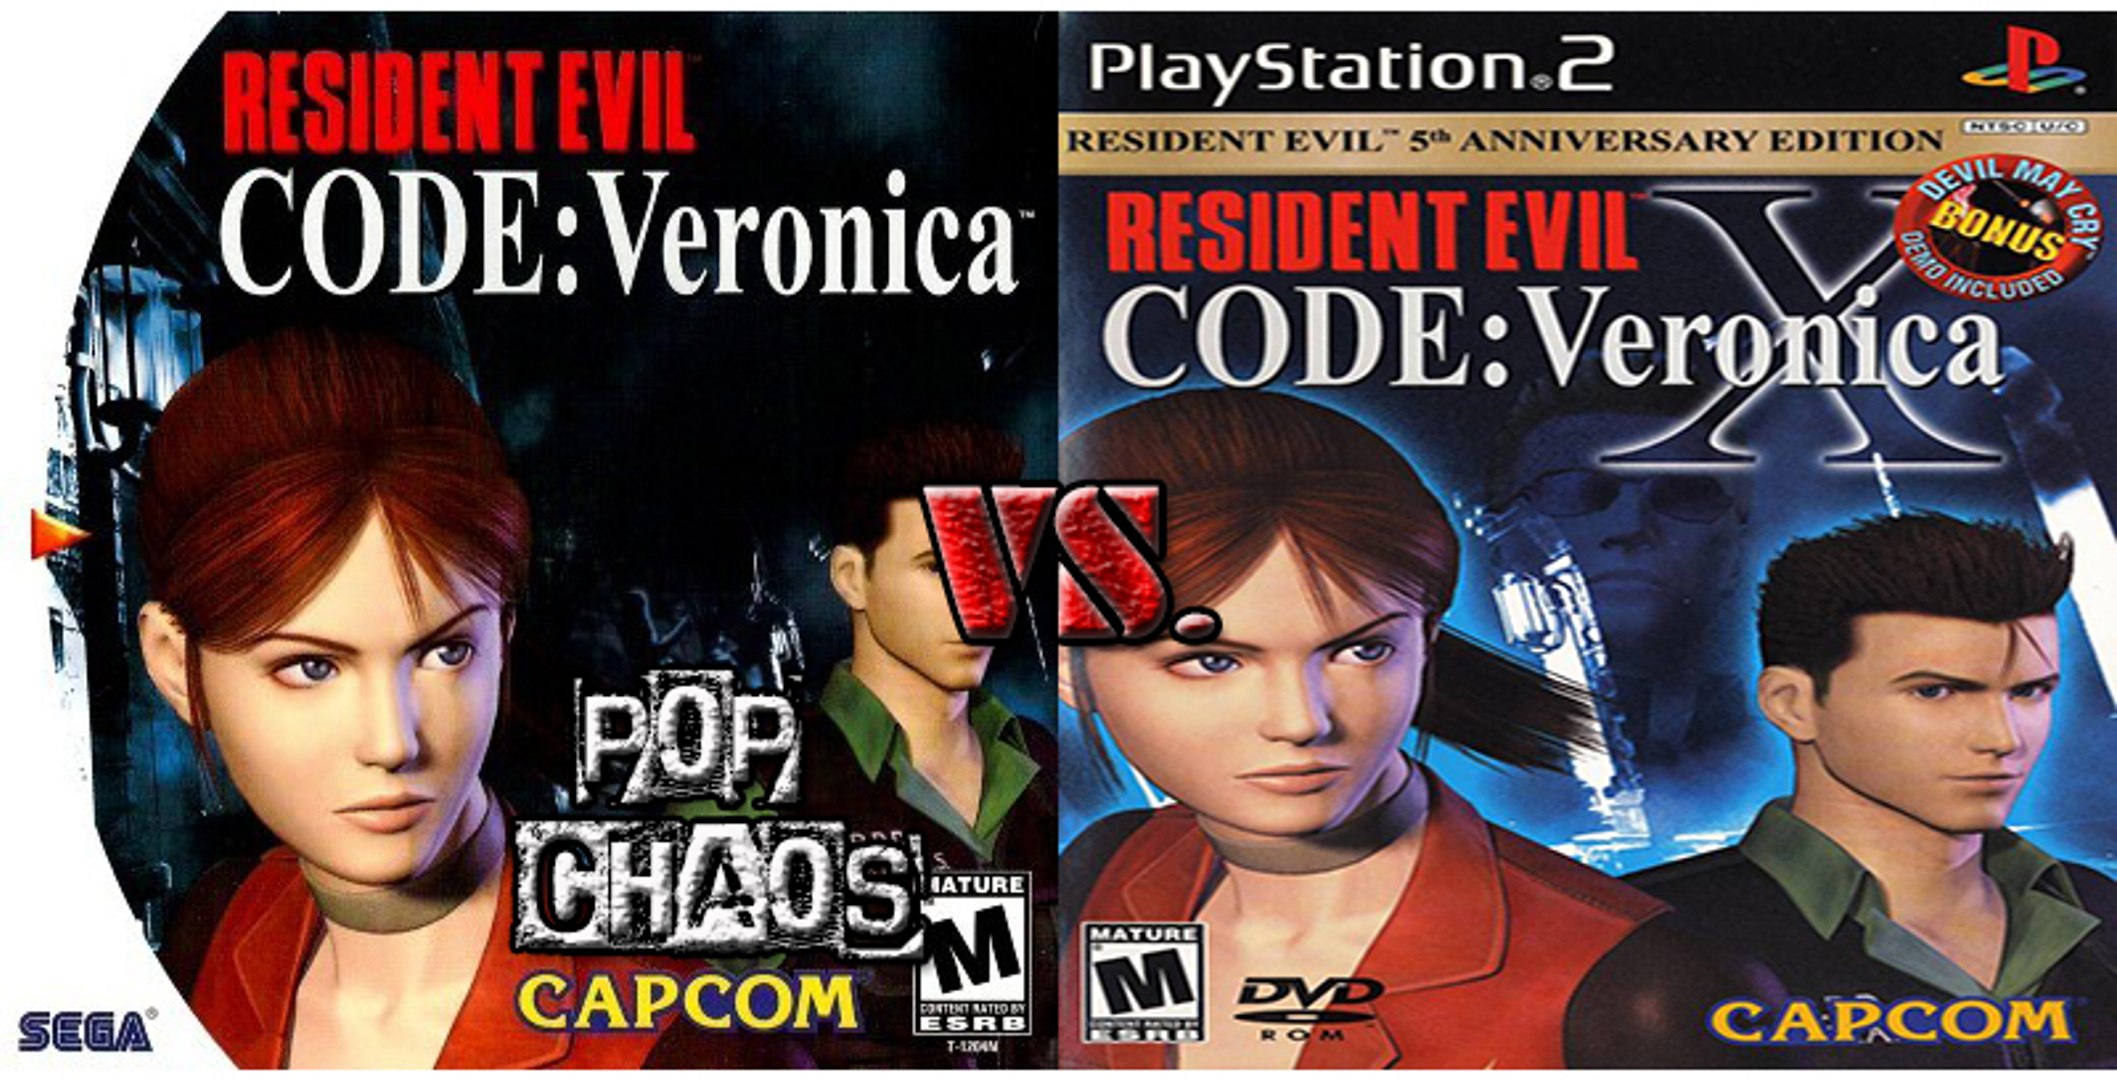 Replying to @ChrisV316 Resident Evil Code Veronica Dreamcast PS2 #resi